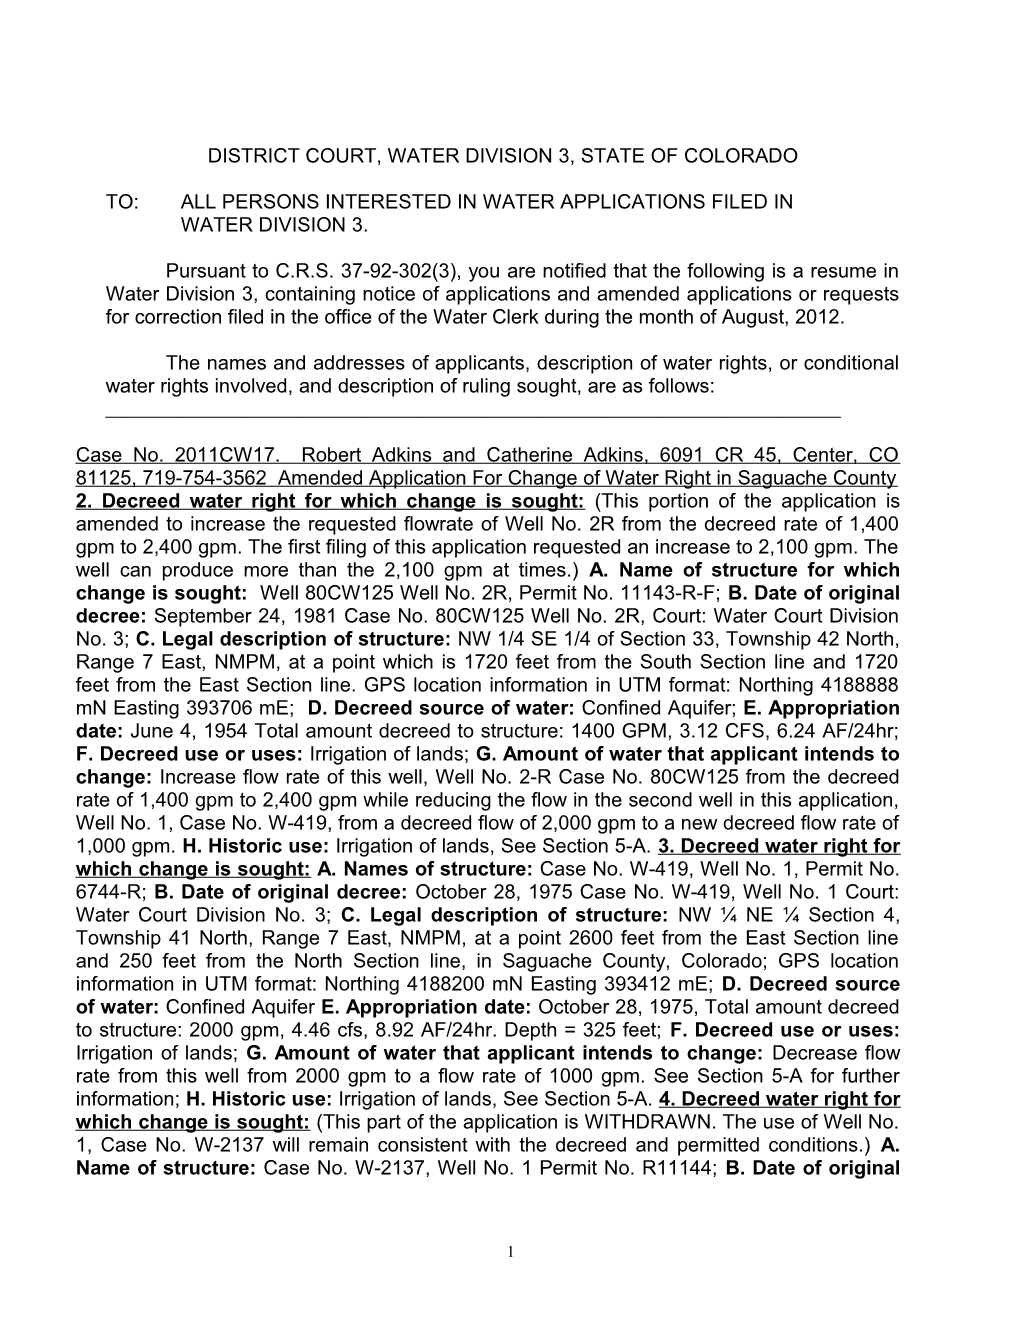 District Court, Water Division 3, State of Colorado s4